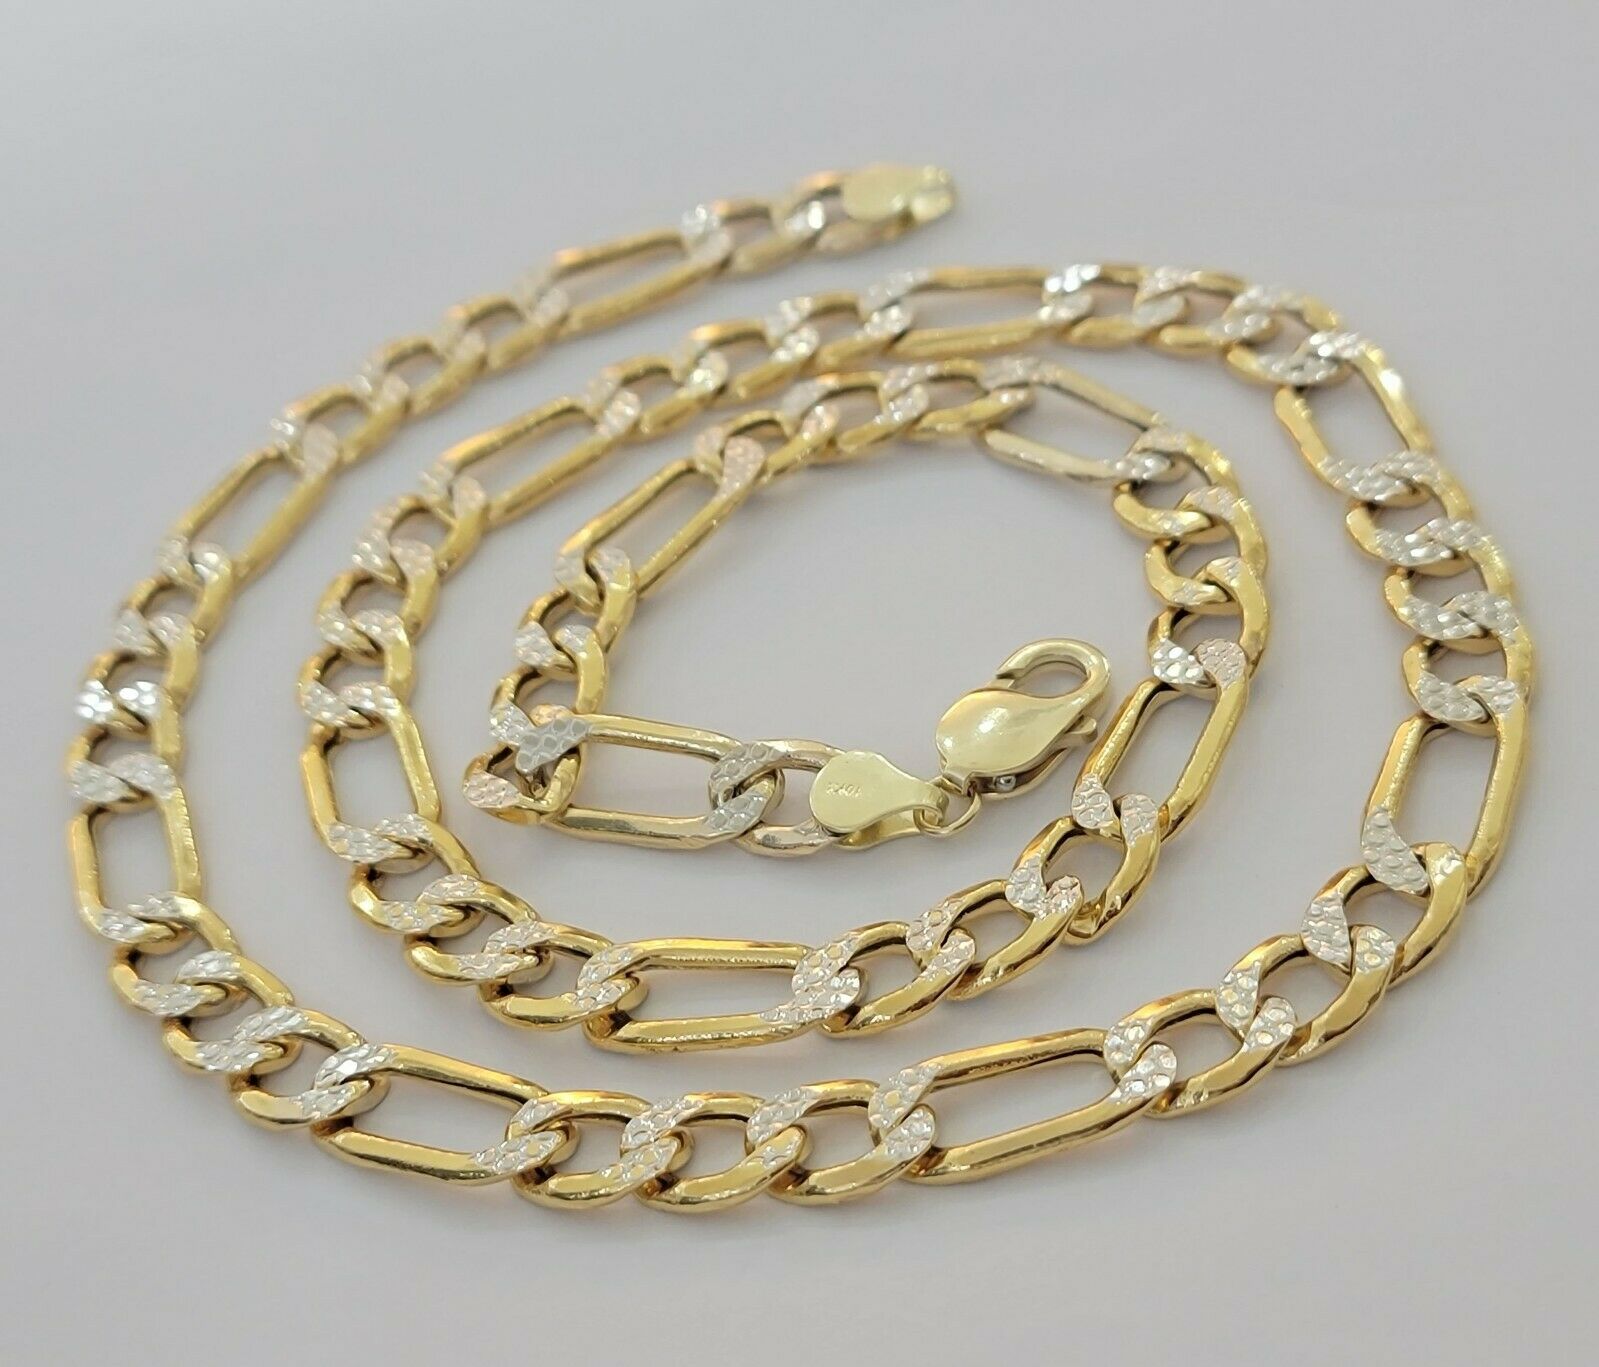 Real Gold 10k Figaro Necklace Men's Chain 9mm 24" Inch Yellow Gold Diamond Cuts